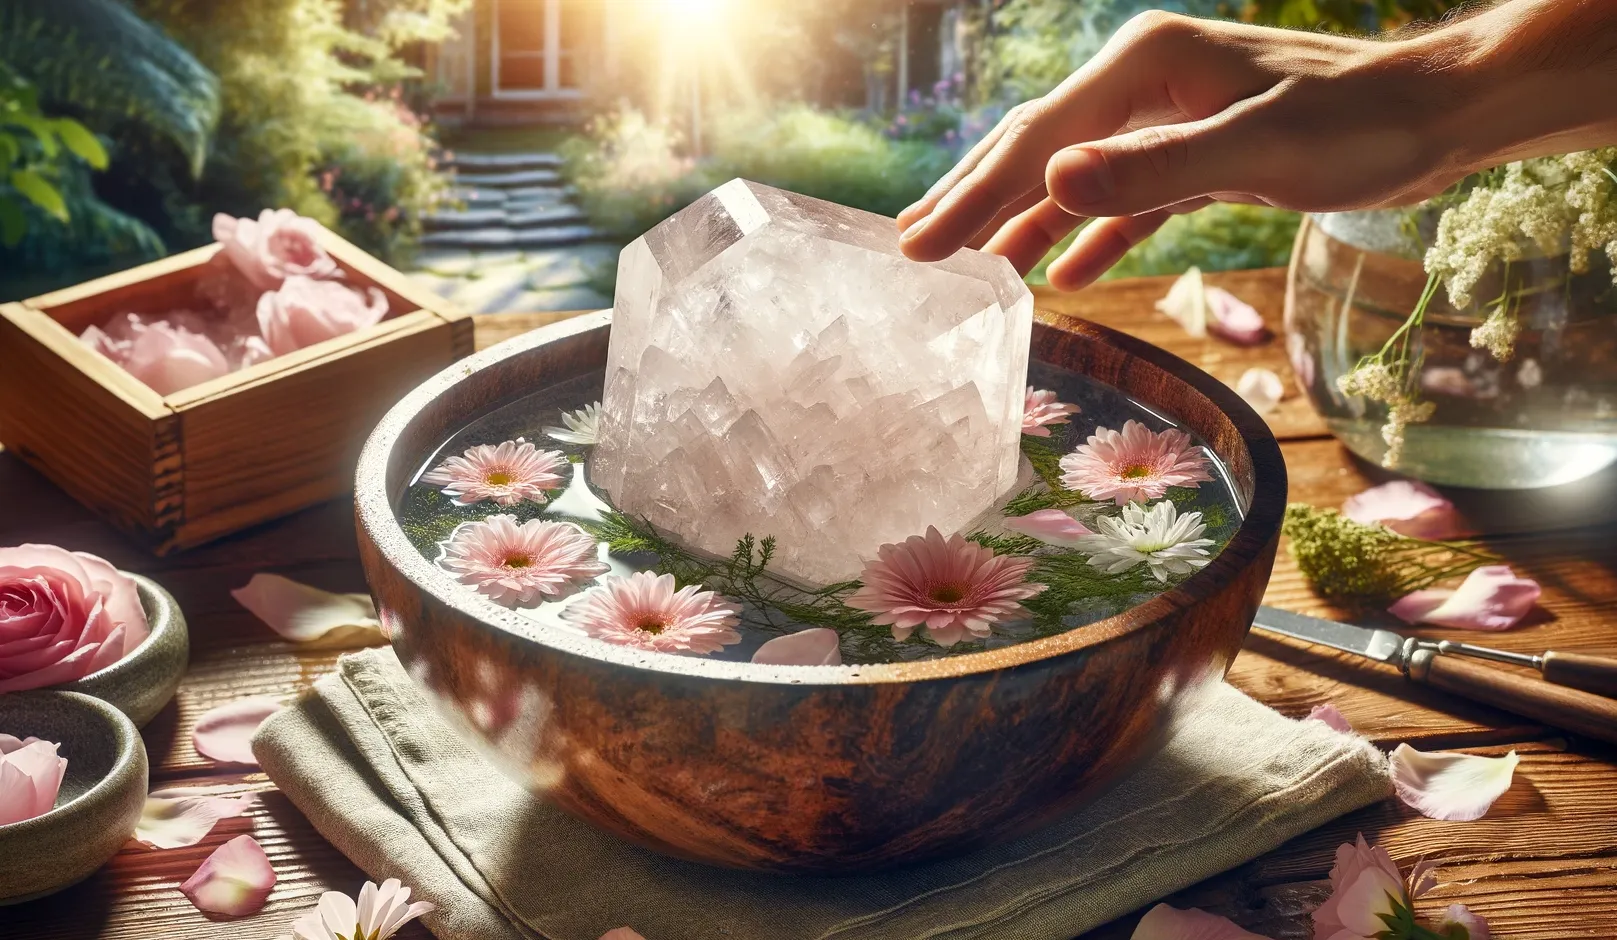 rose quartz crystal being cleaned in a flower filled wooden bowl